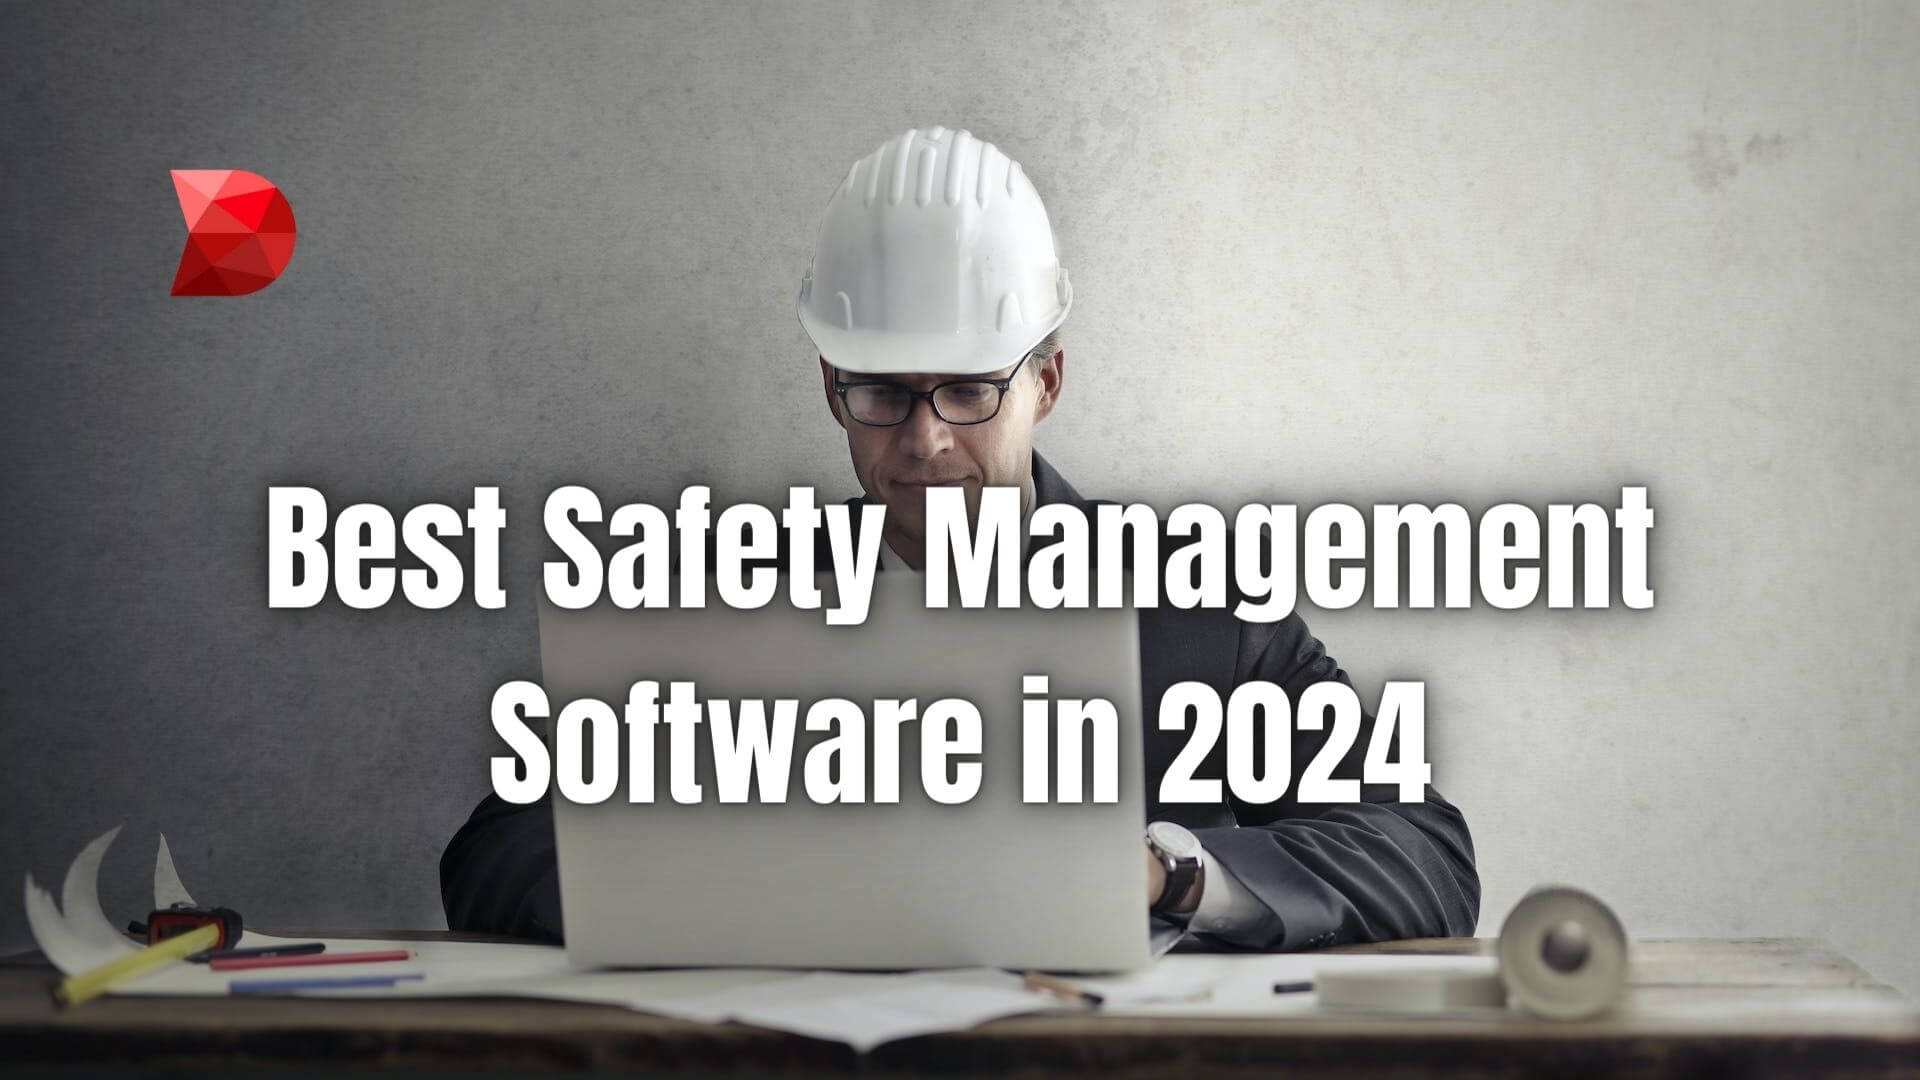 This article will share the best safety management software so you will know which to choose for your business. Read here to learn more!